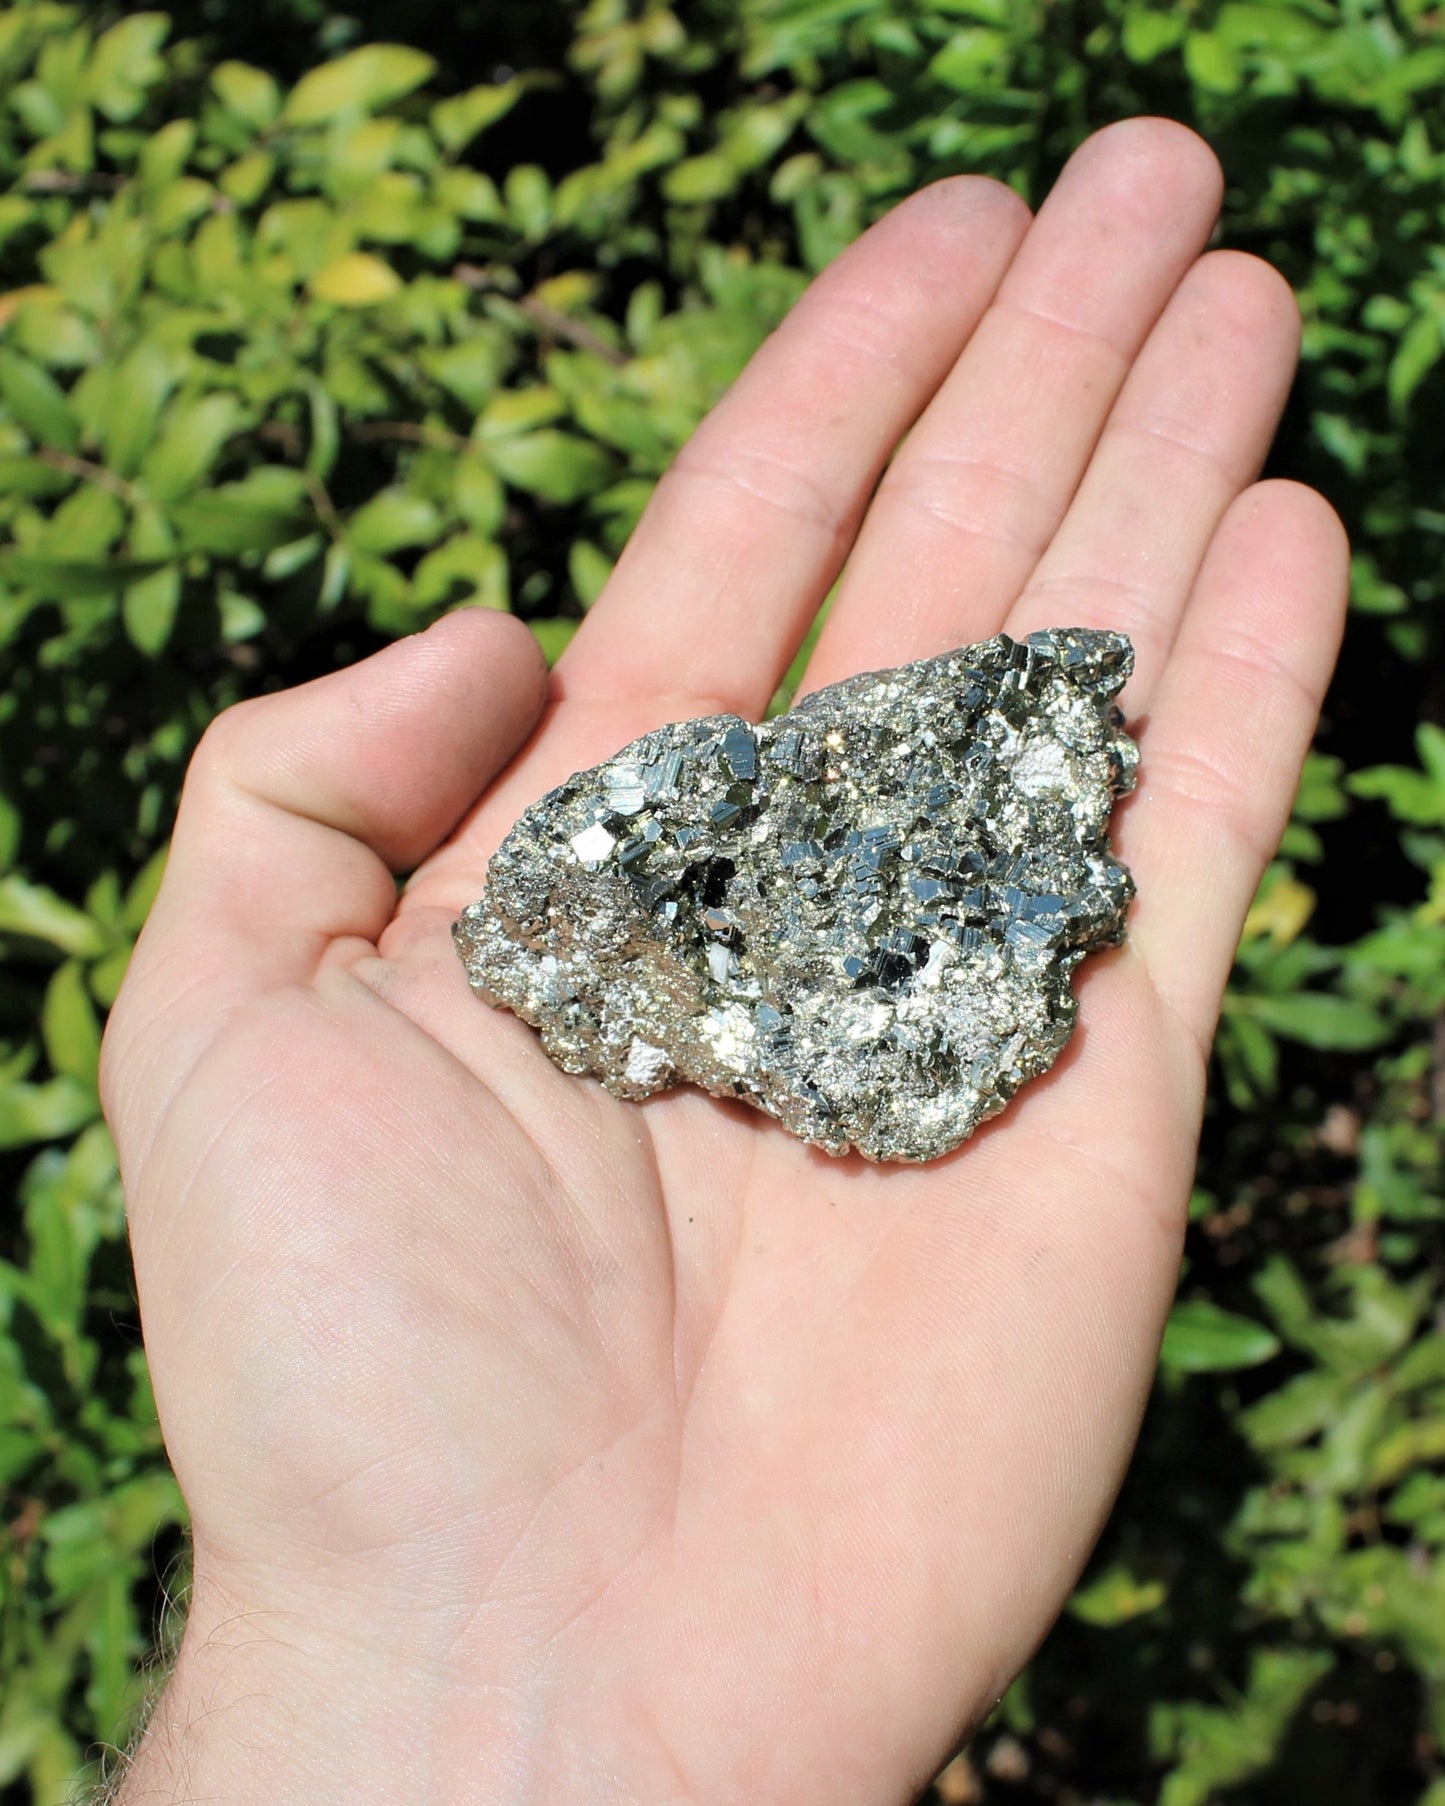 Rough Natural Pyrite Crystal Cluster Pieces